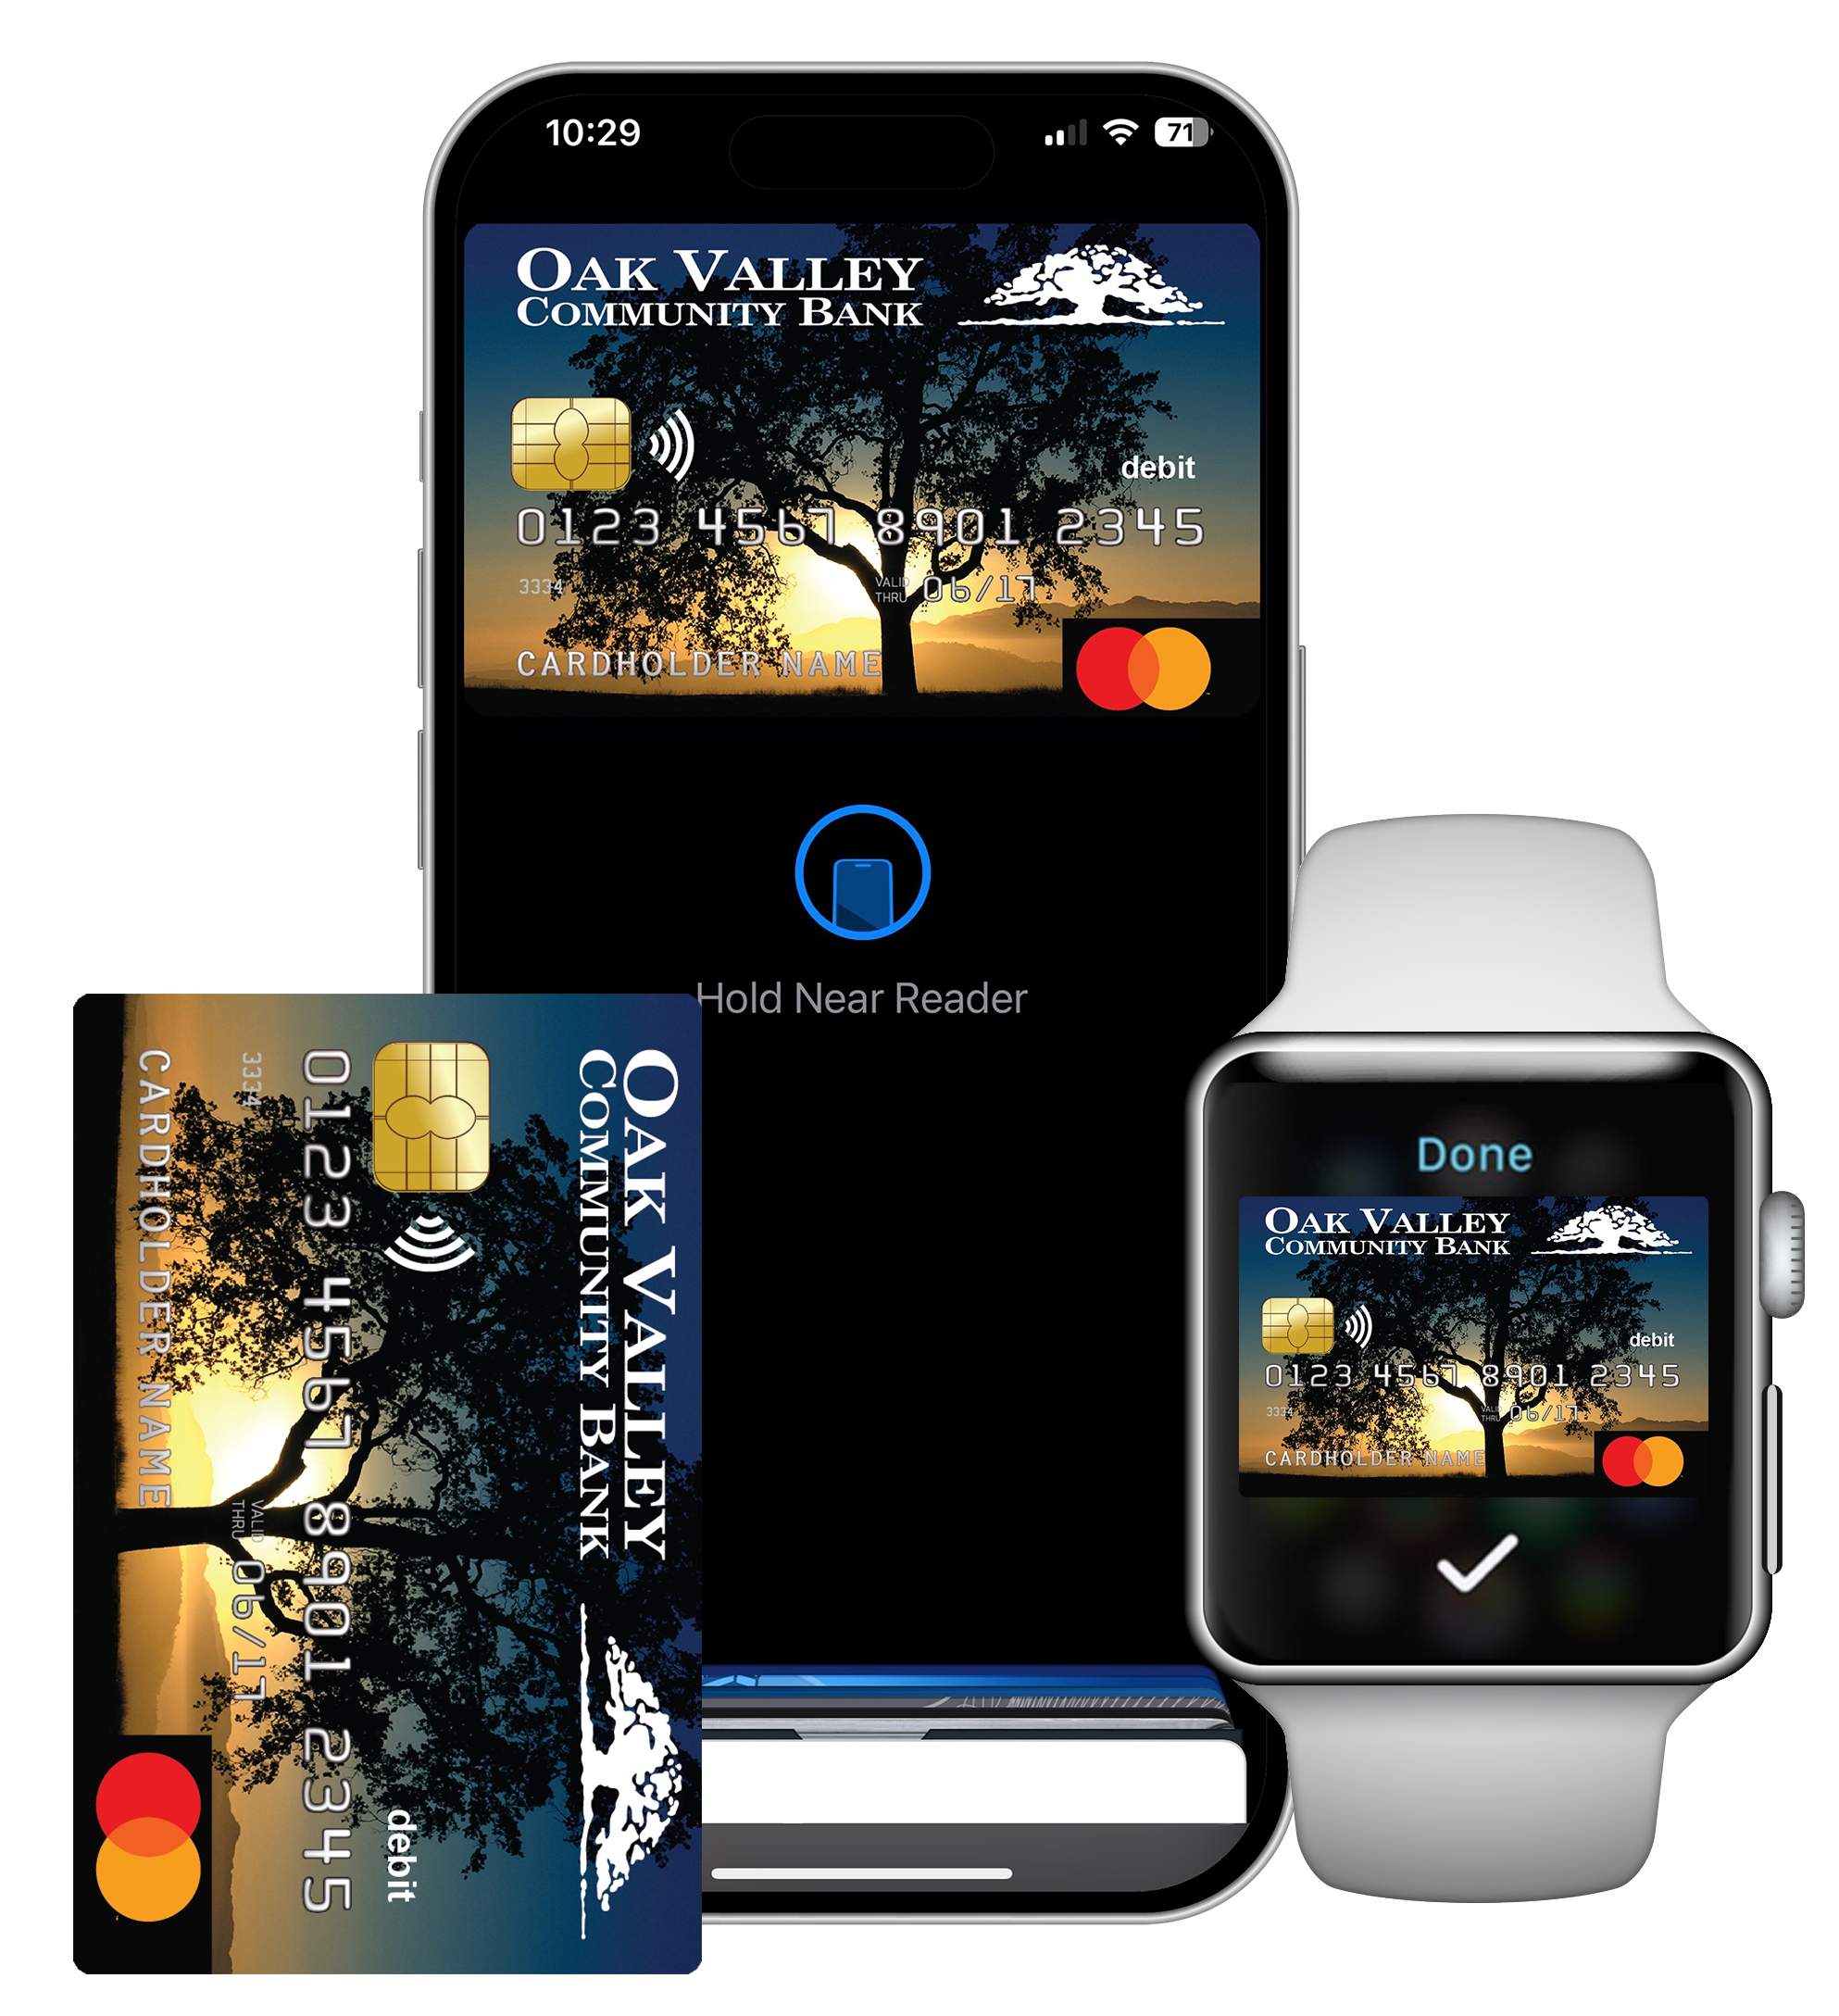 Oak Valley Community Bank debit card shown on different apple devices to use with Apple Pay